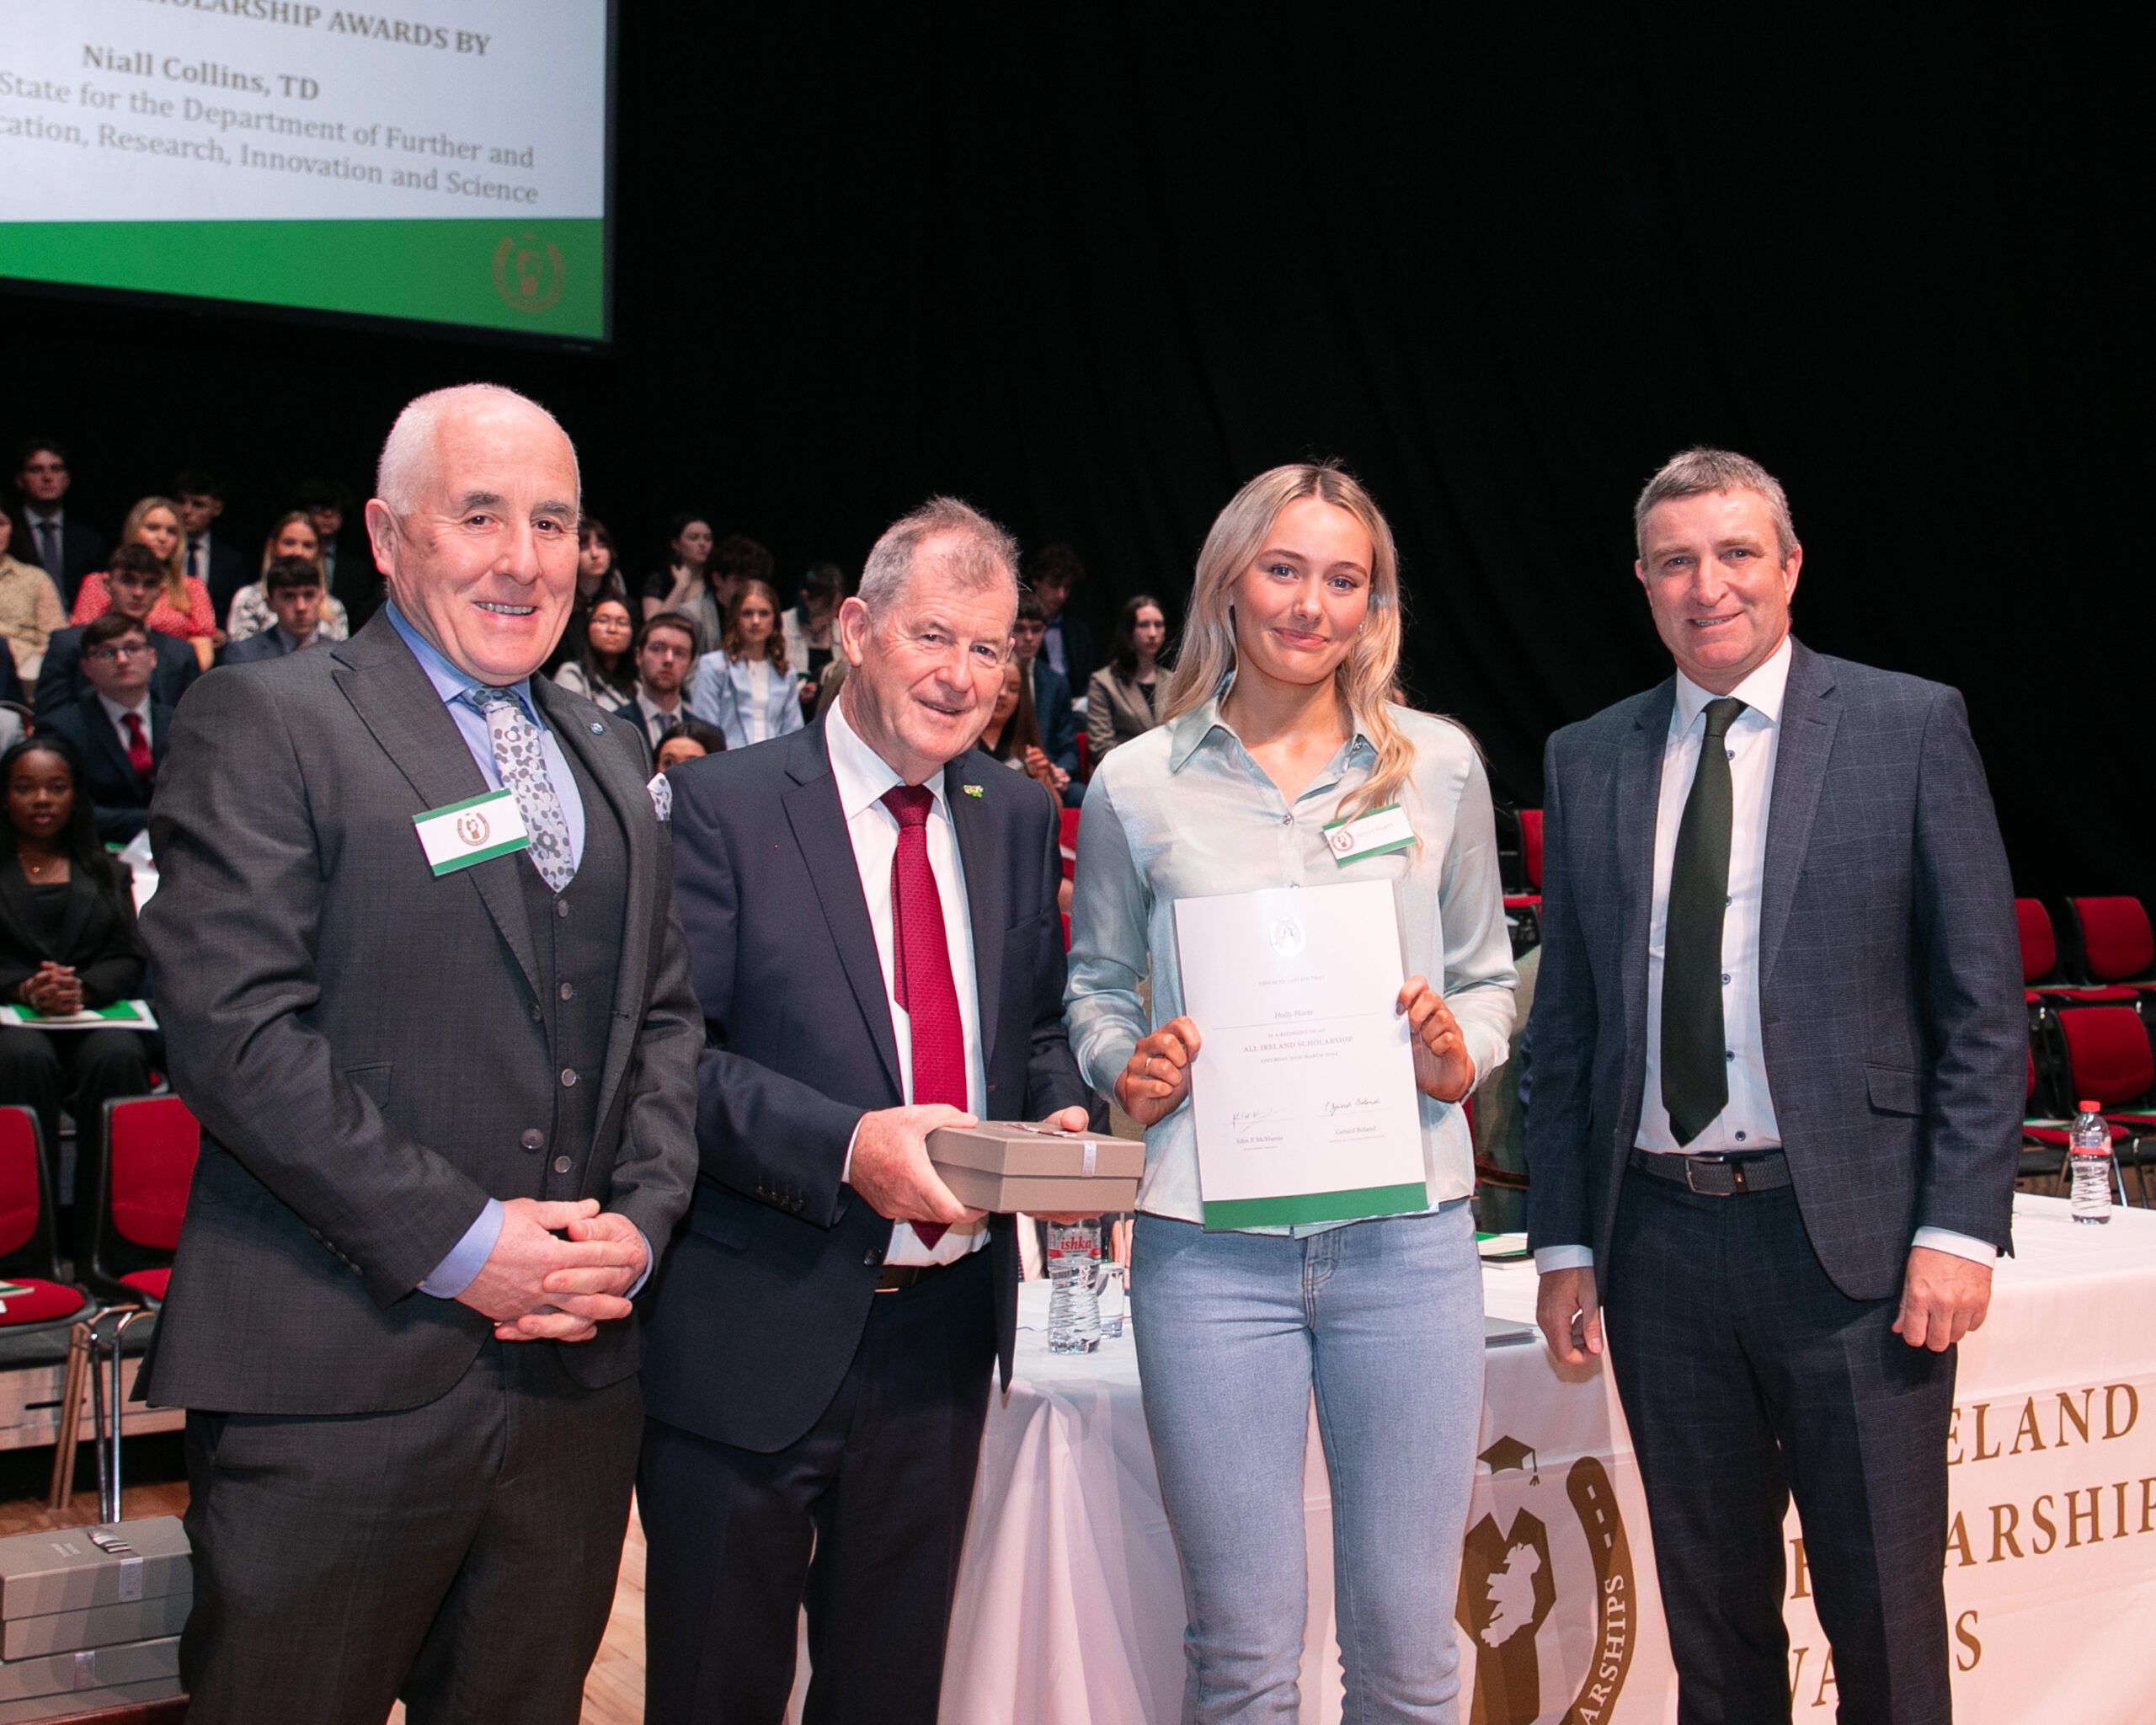 Sponsor JP McManus and Niall Collins, Minister of State at the Department of Further and Higher Education, Research, Innovation and Science presenting All Ireland Scholarship Award to Holly Harte and Padraig Flanagan, Principal, Castletroy College, Limerick.